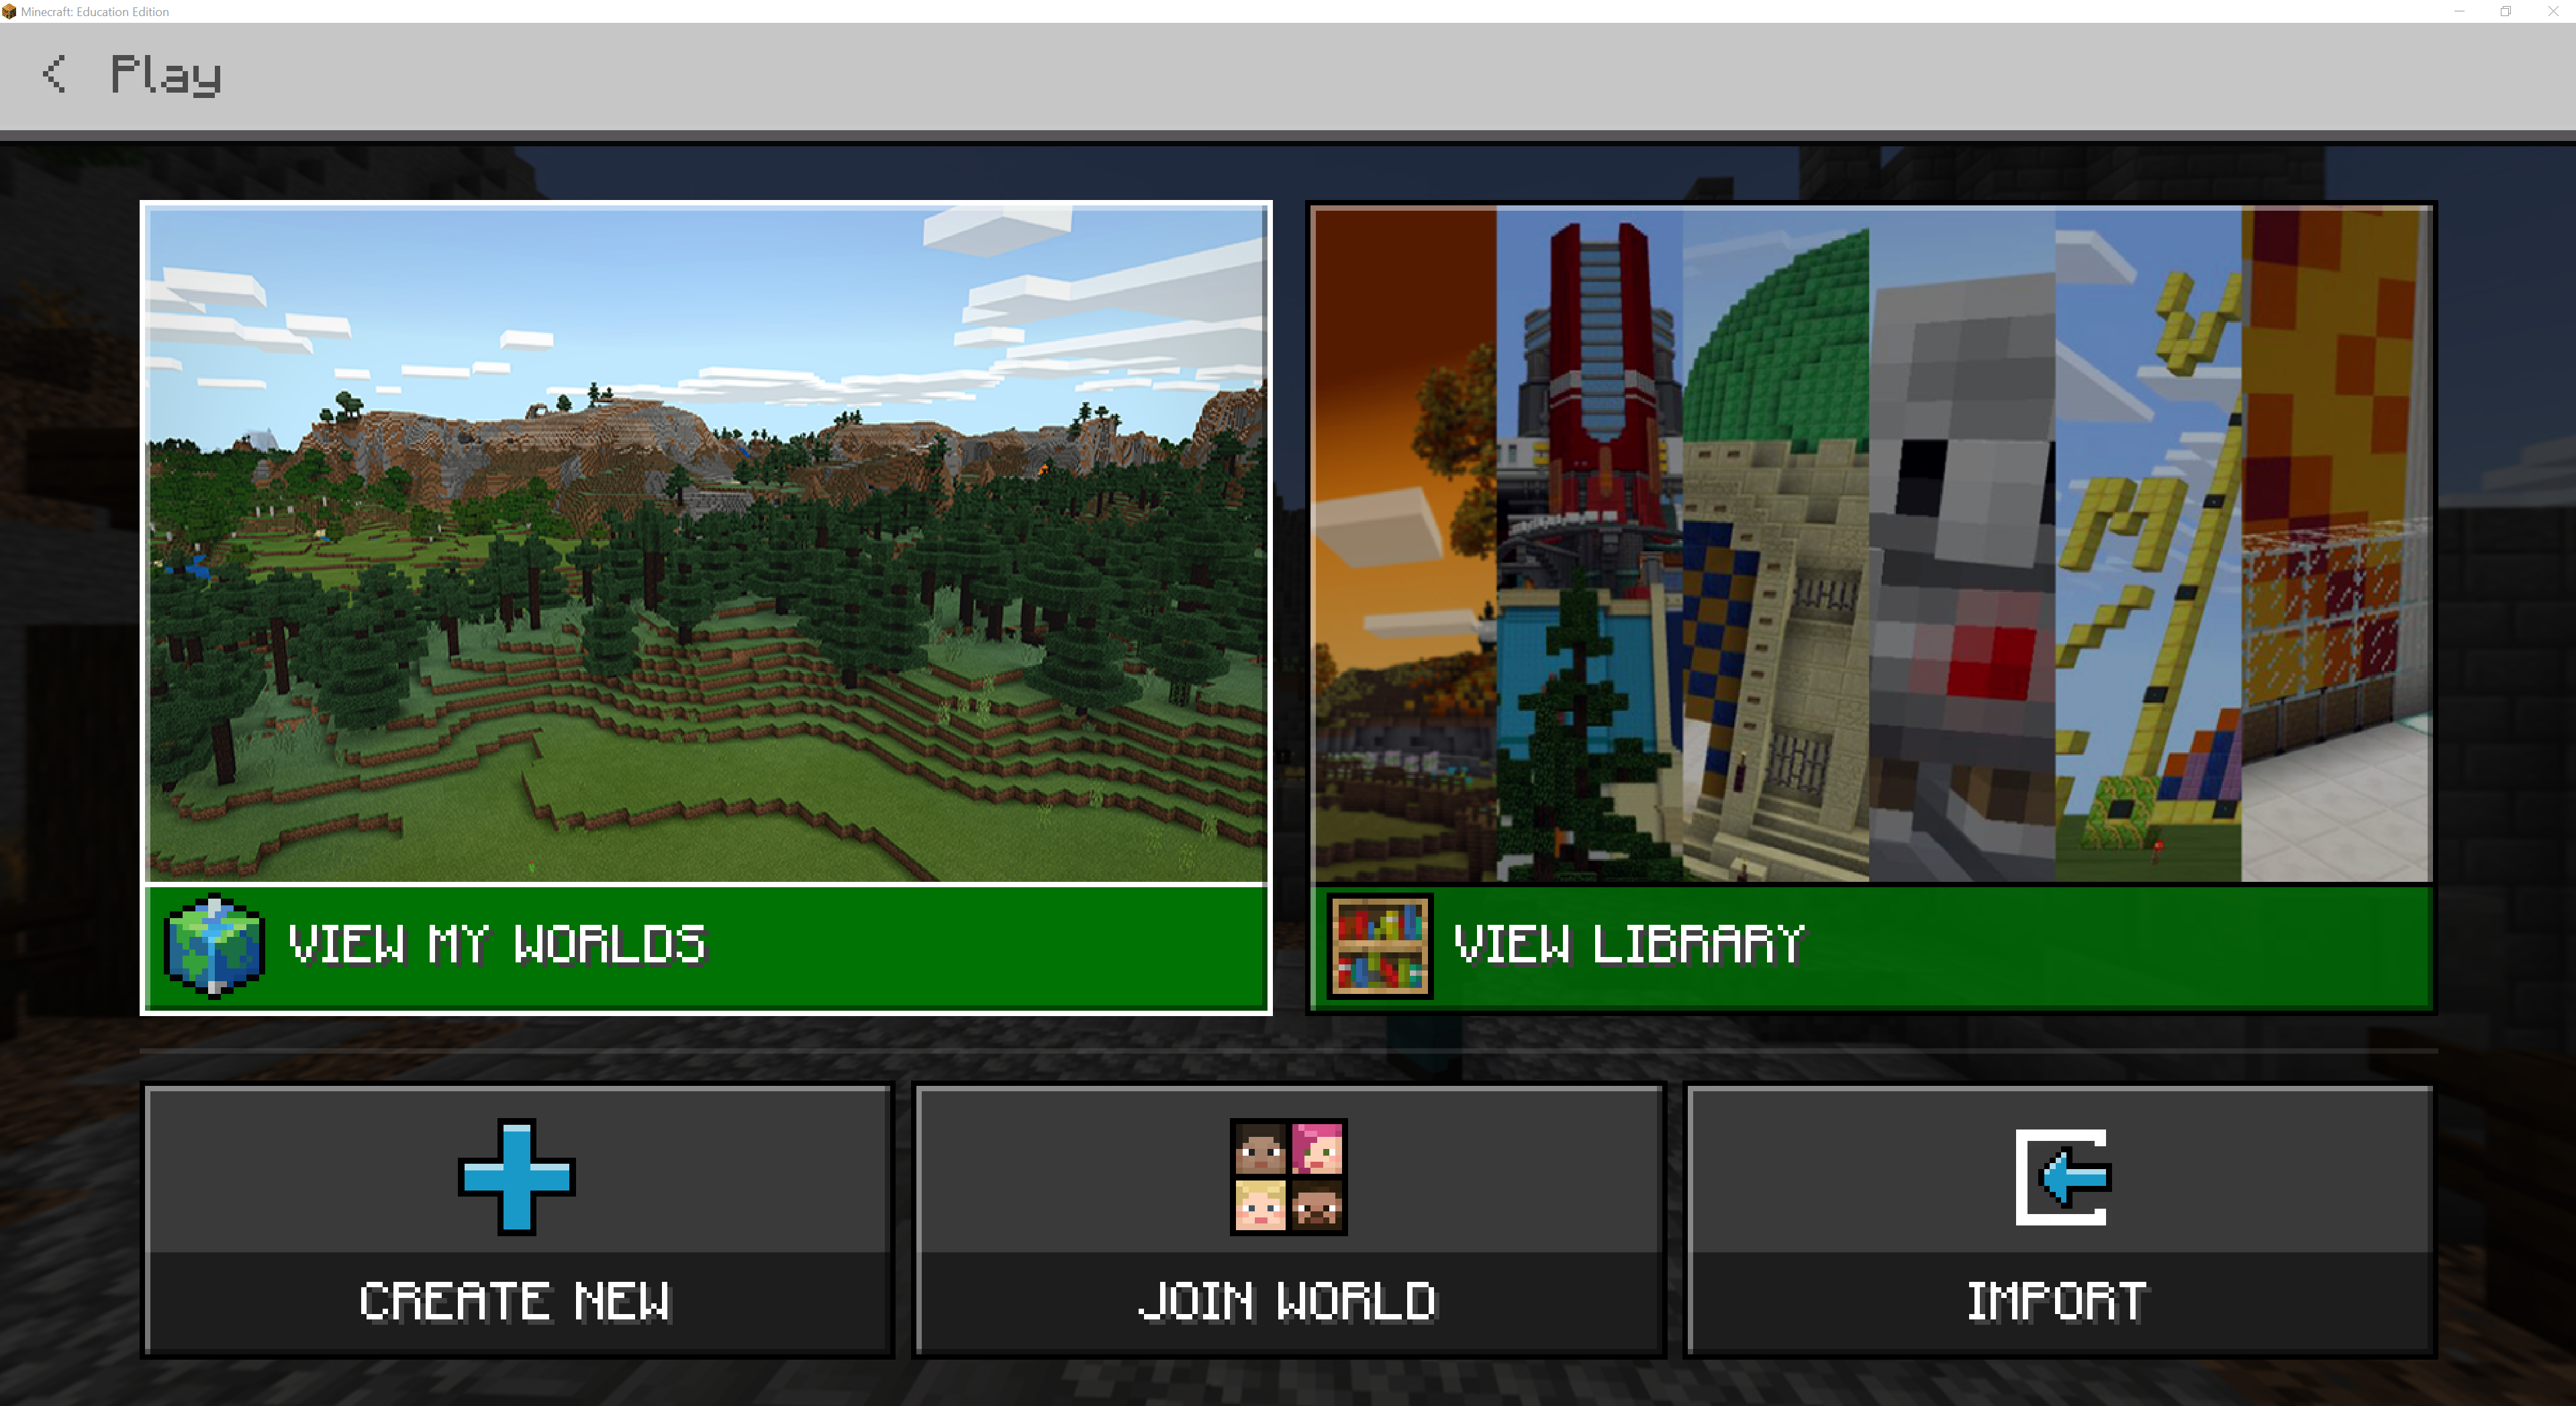 Teaching w/ Minecraft: Mods, Plugins, and Add-Ons for Minecraft PE